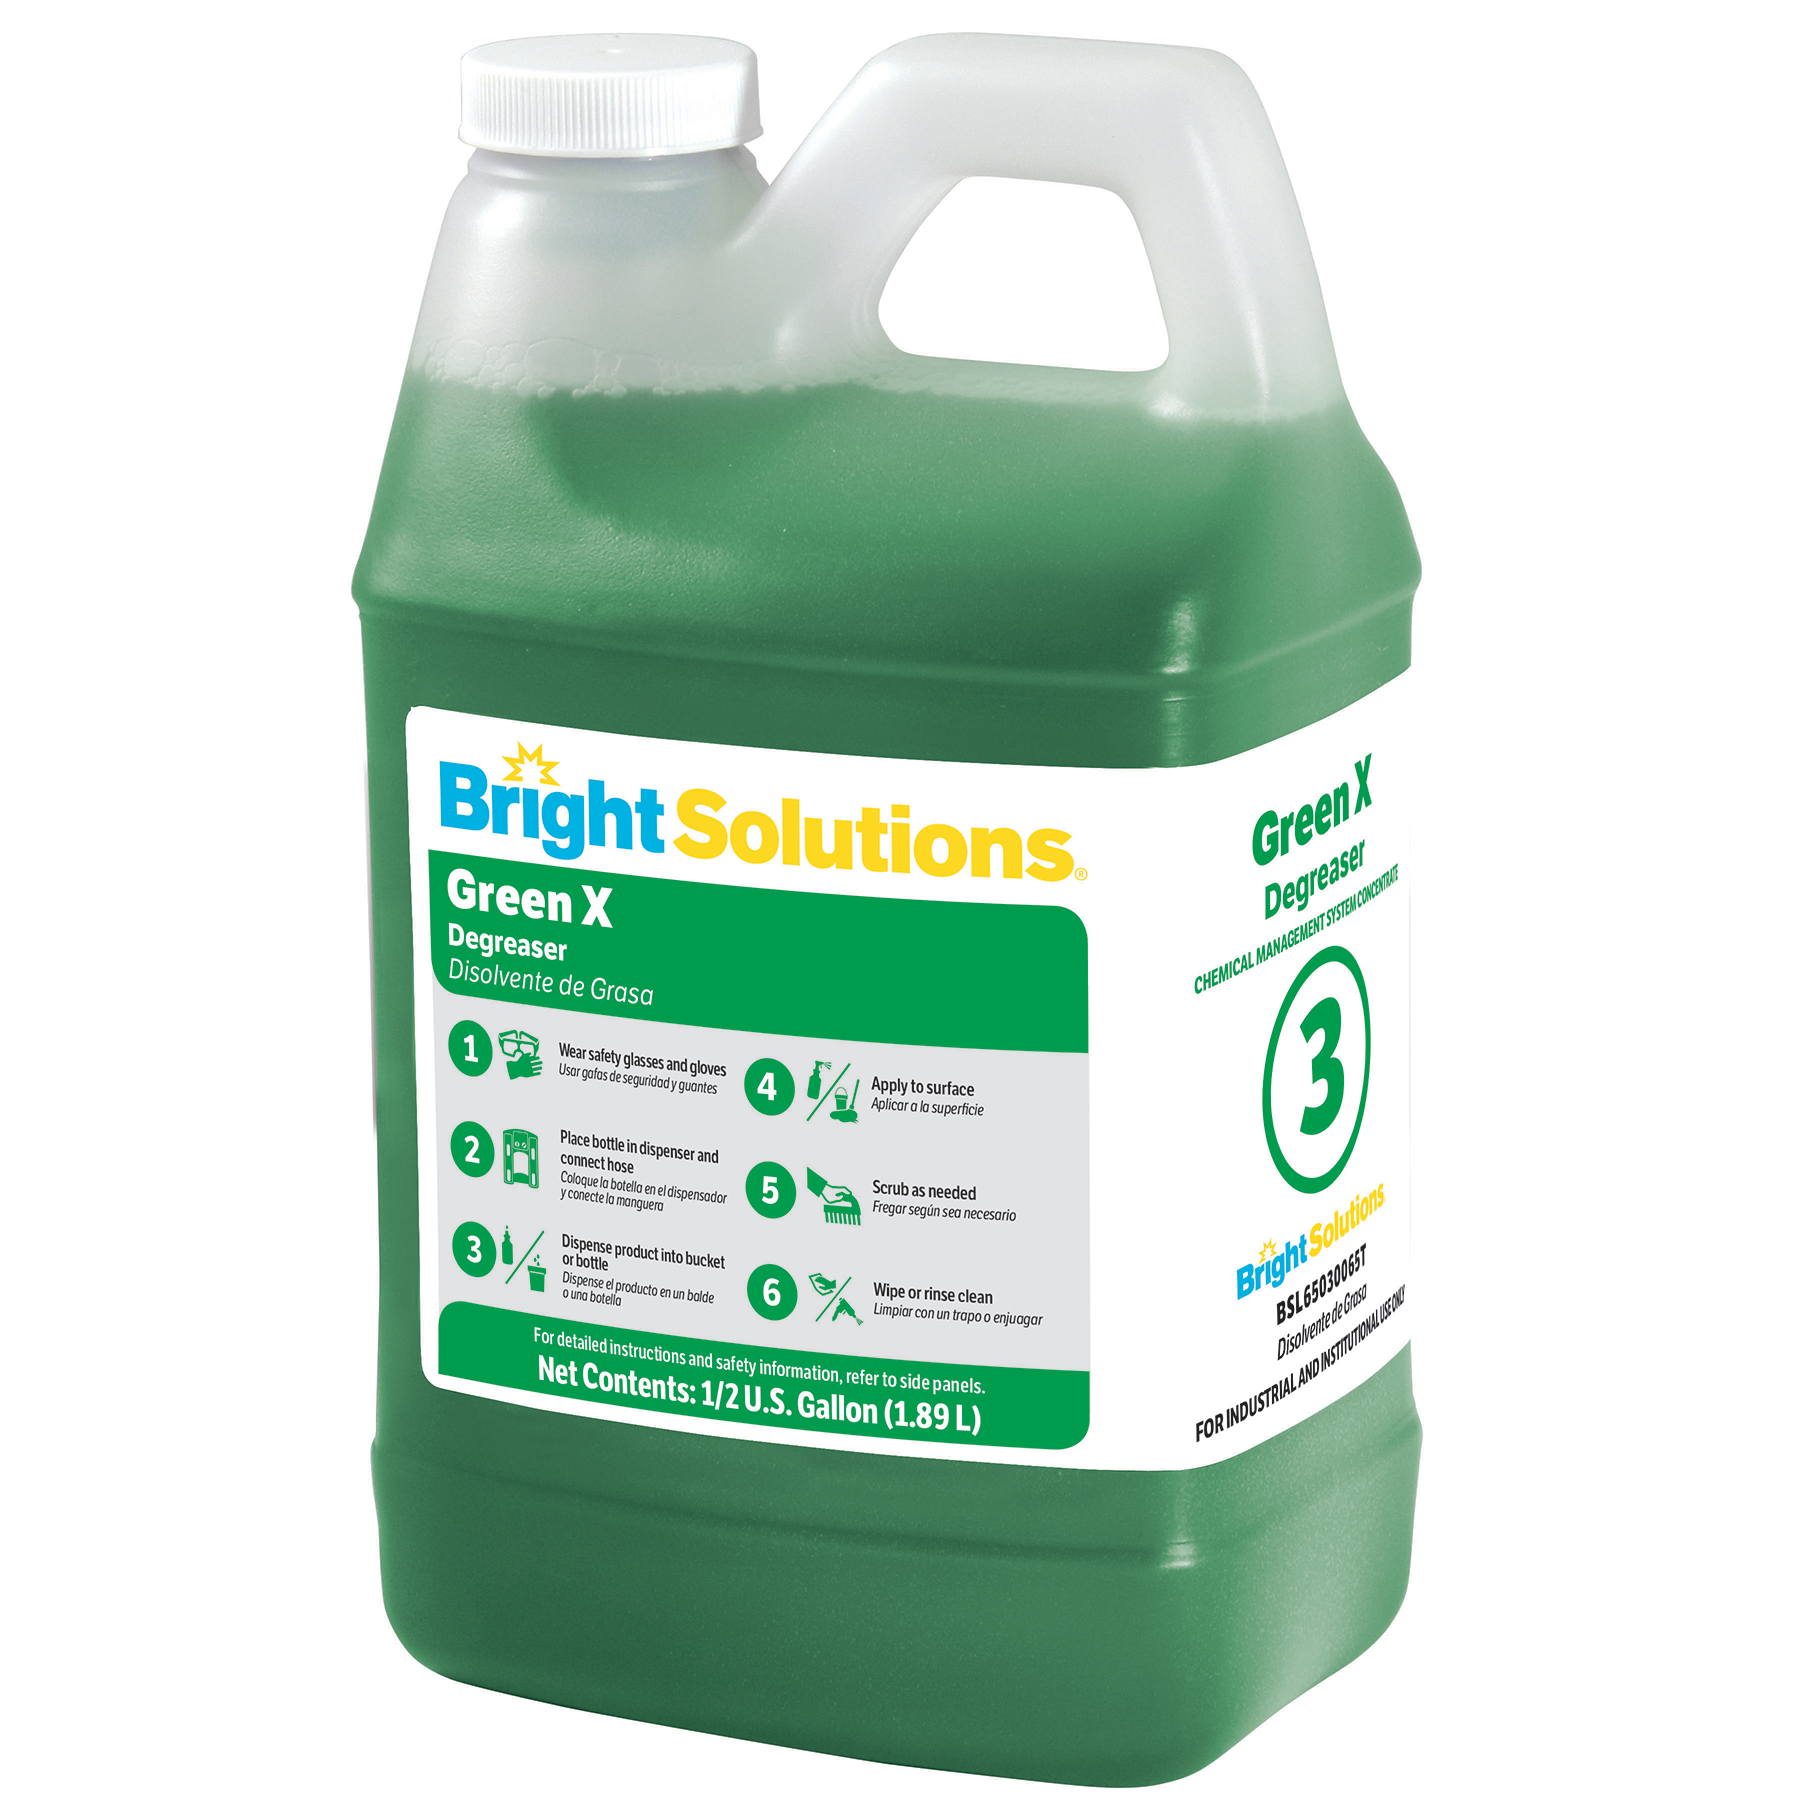 4/64OZ Bright Solutions Green X Degreaser #3